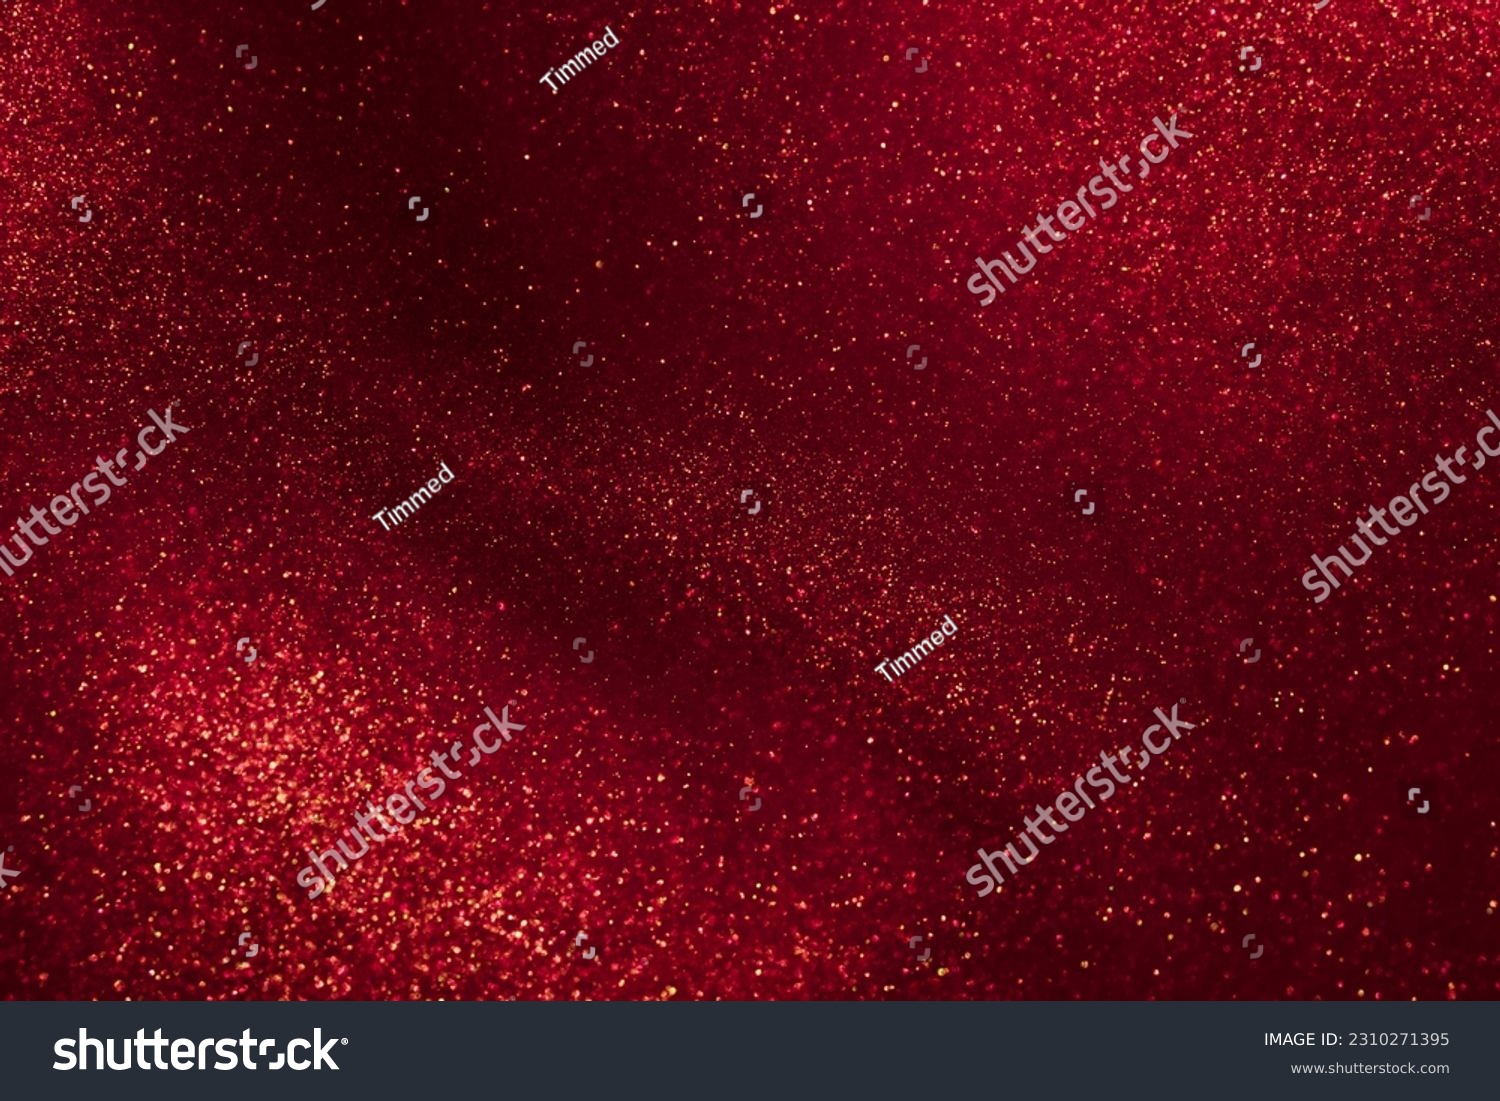 Abstract strains of gold particles in a red liquid. A mysterious glistening fluid background. Golden glittering particles on dark red background. #2310271395